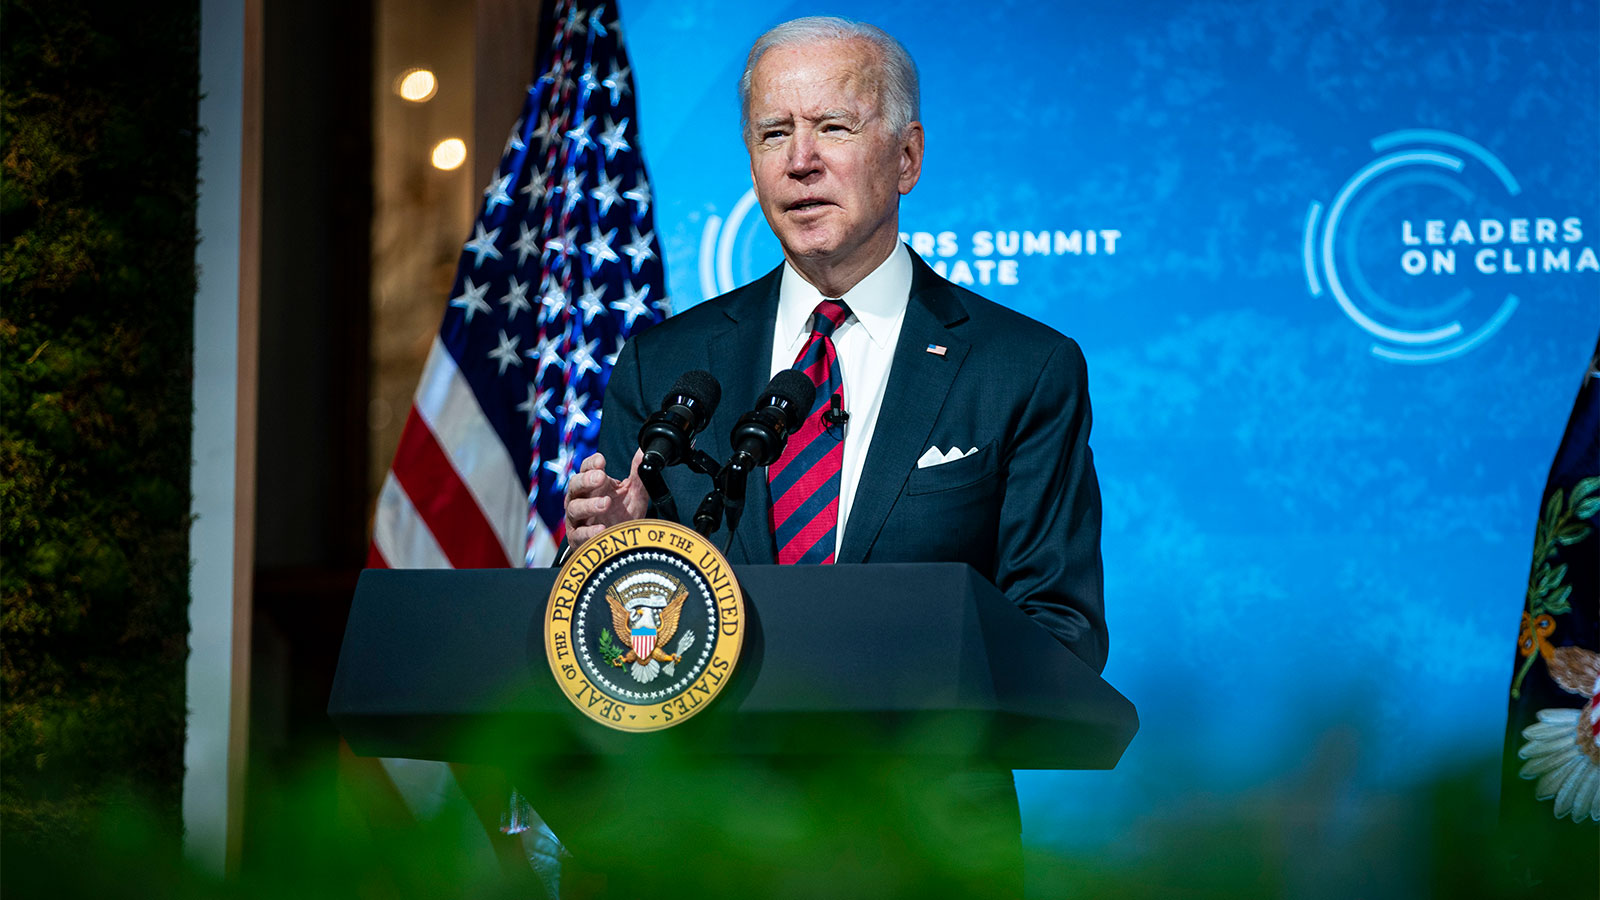 President Joe Biden delivering remarks during a virtual Leaders Summit on Climate